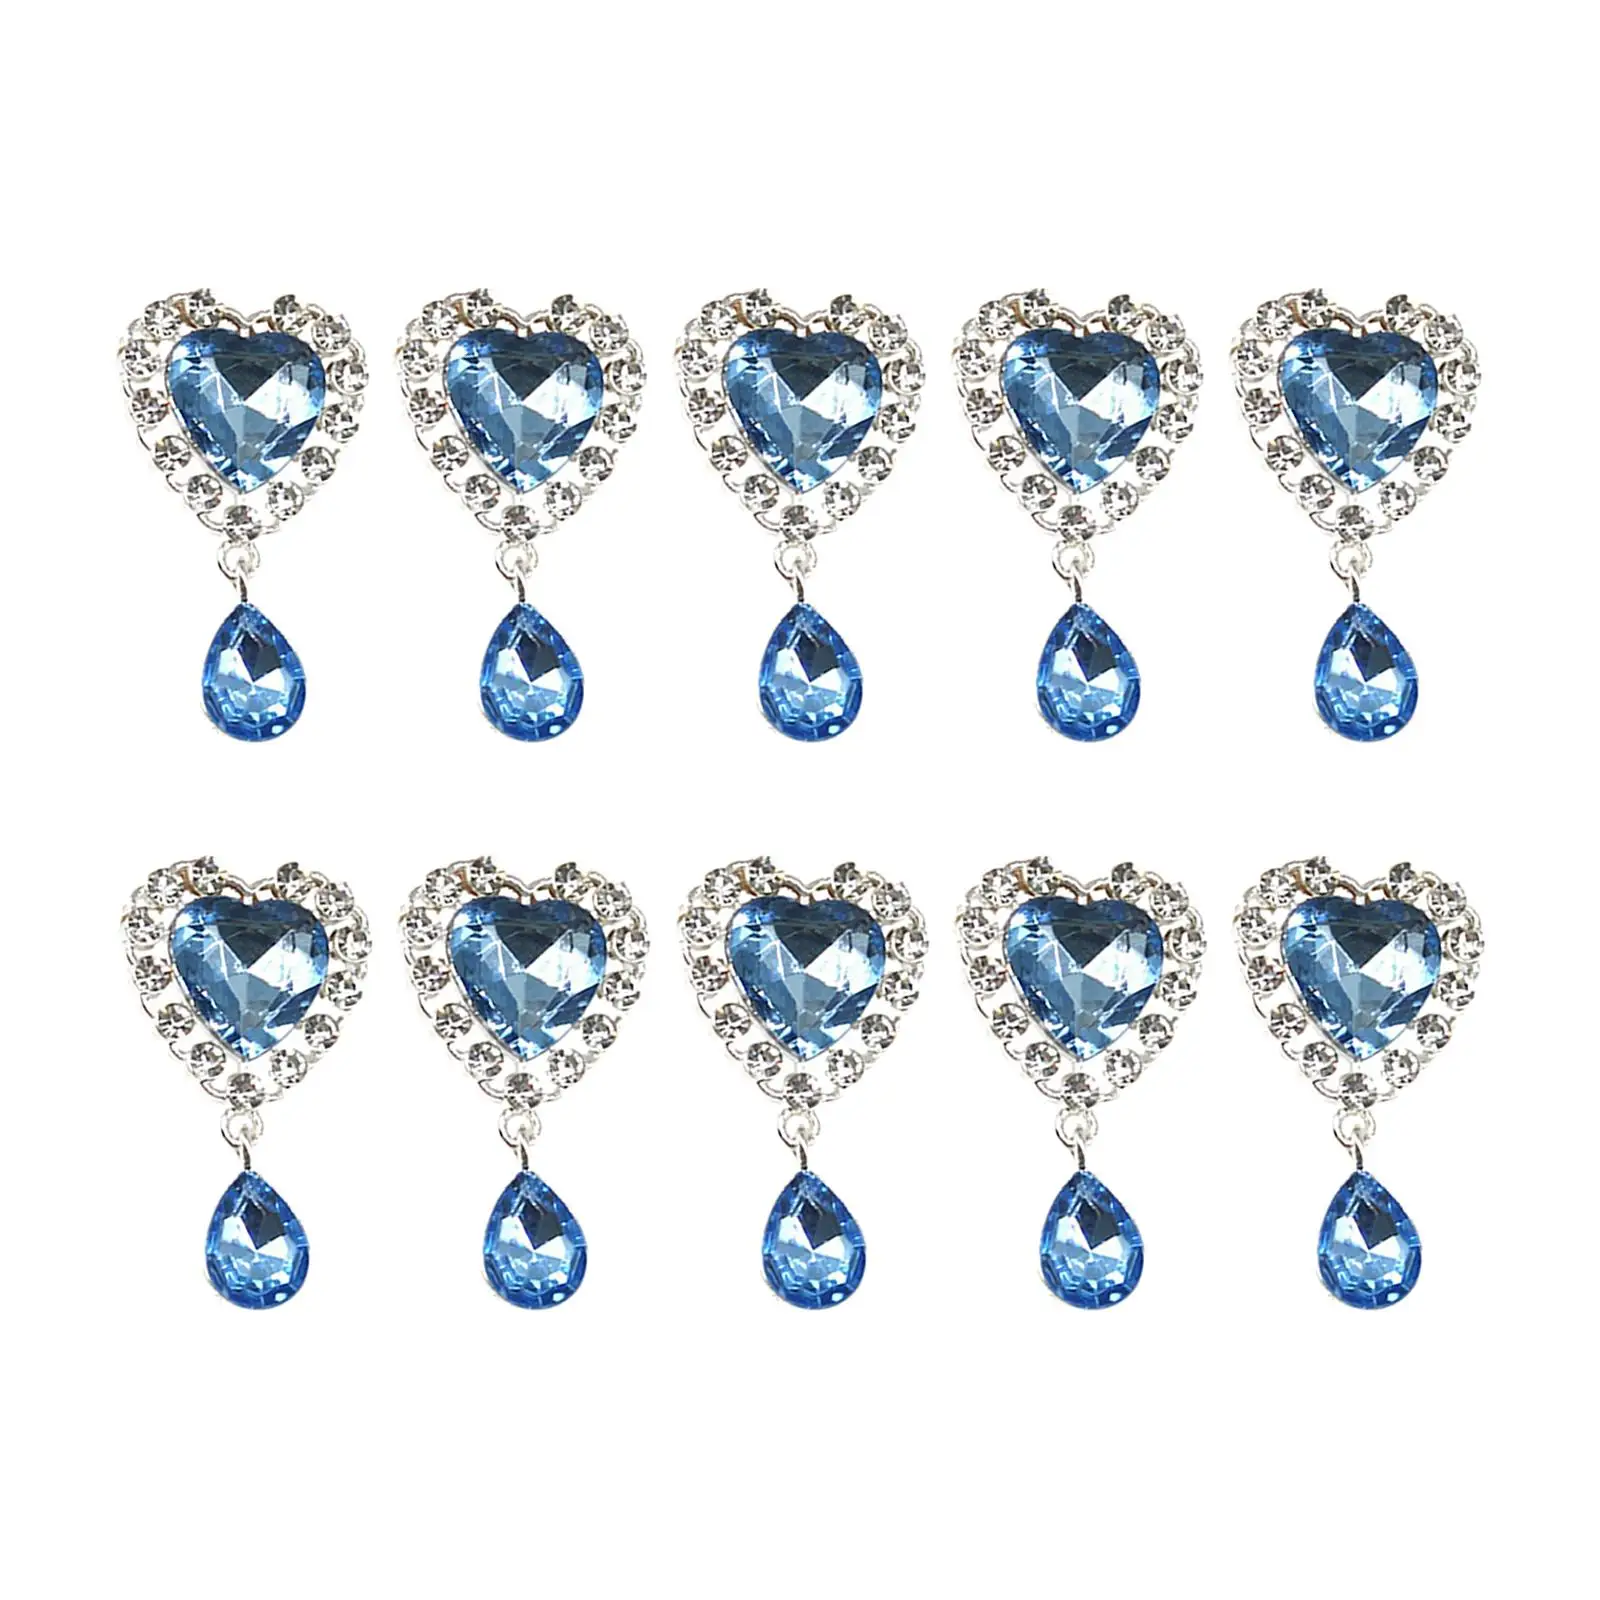 10x Heart Rhinestone Buttons Alloy Heart Pendant Rhinestone Charms for DIY Crafts Wedding Bouquet Jewelry Making Supplies